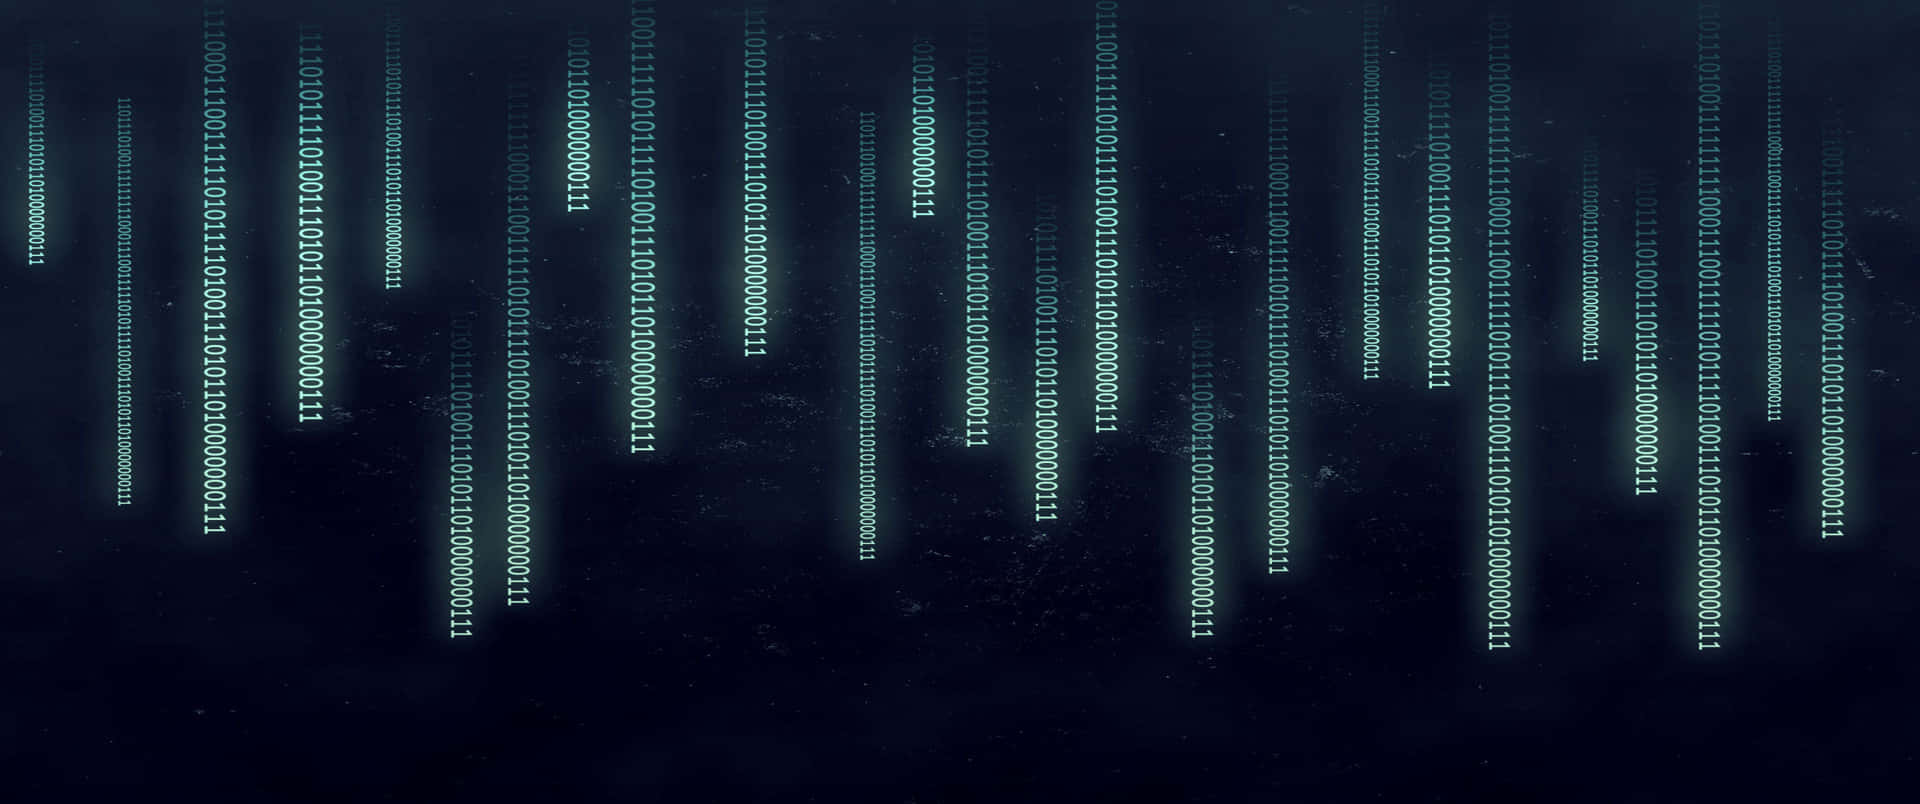 100+] 3440x1440p Programming Backgrounds